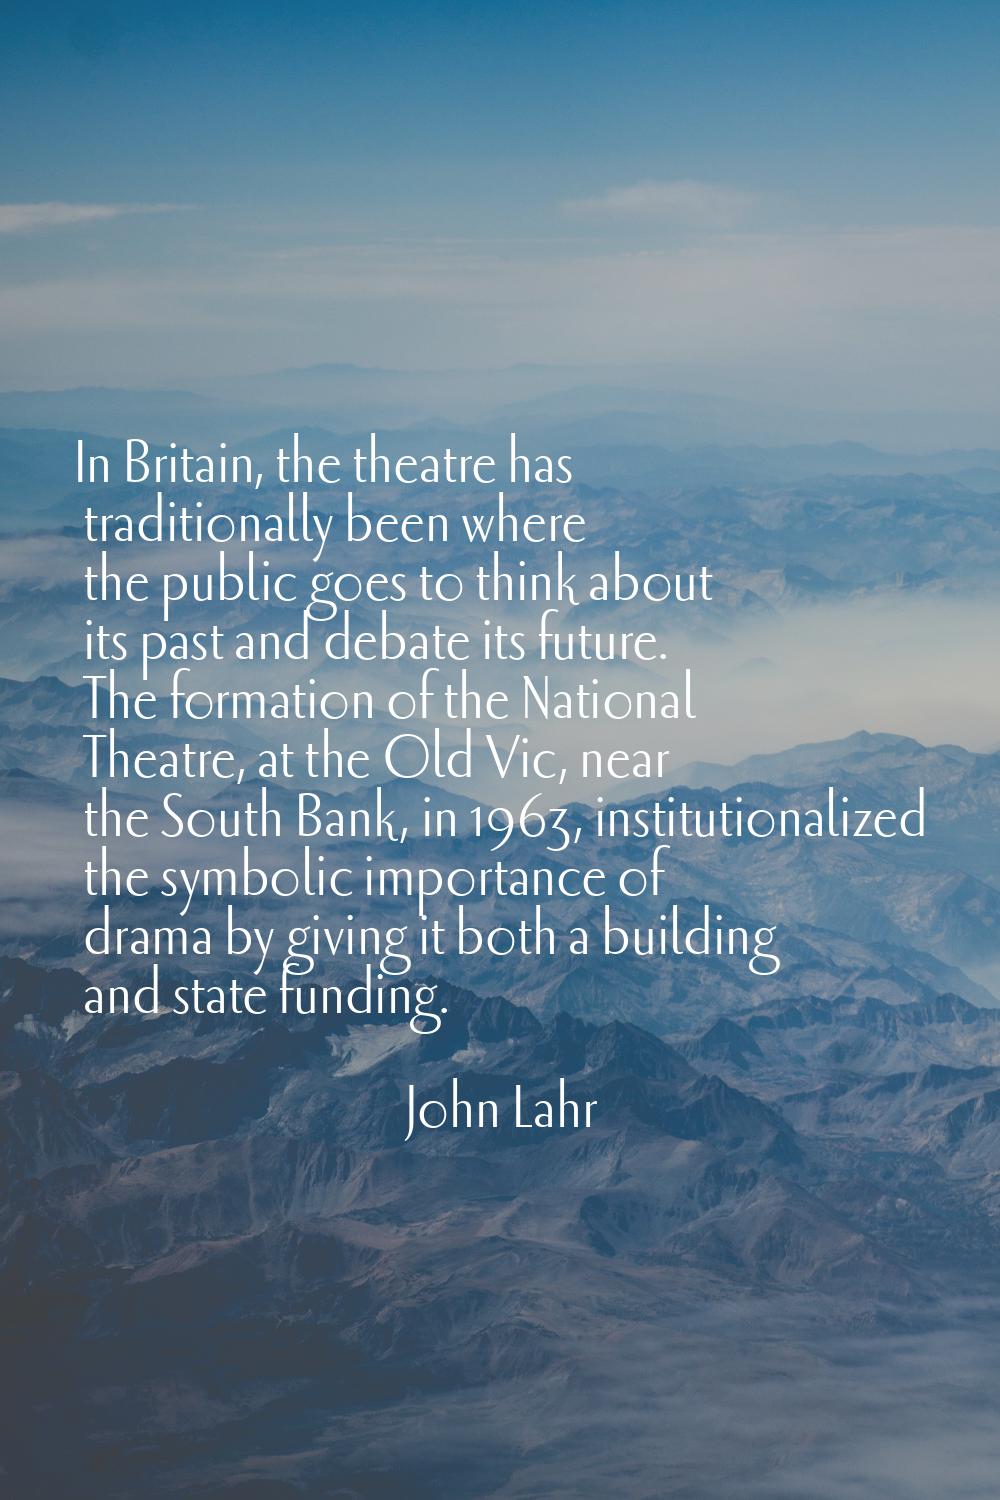 In Britain, the theatre has traditionally been where the public goes to think about its past and de